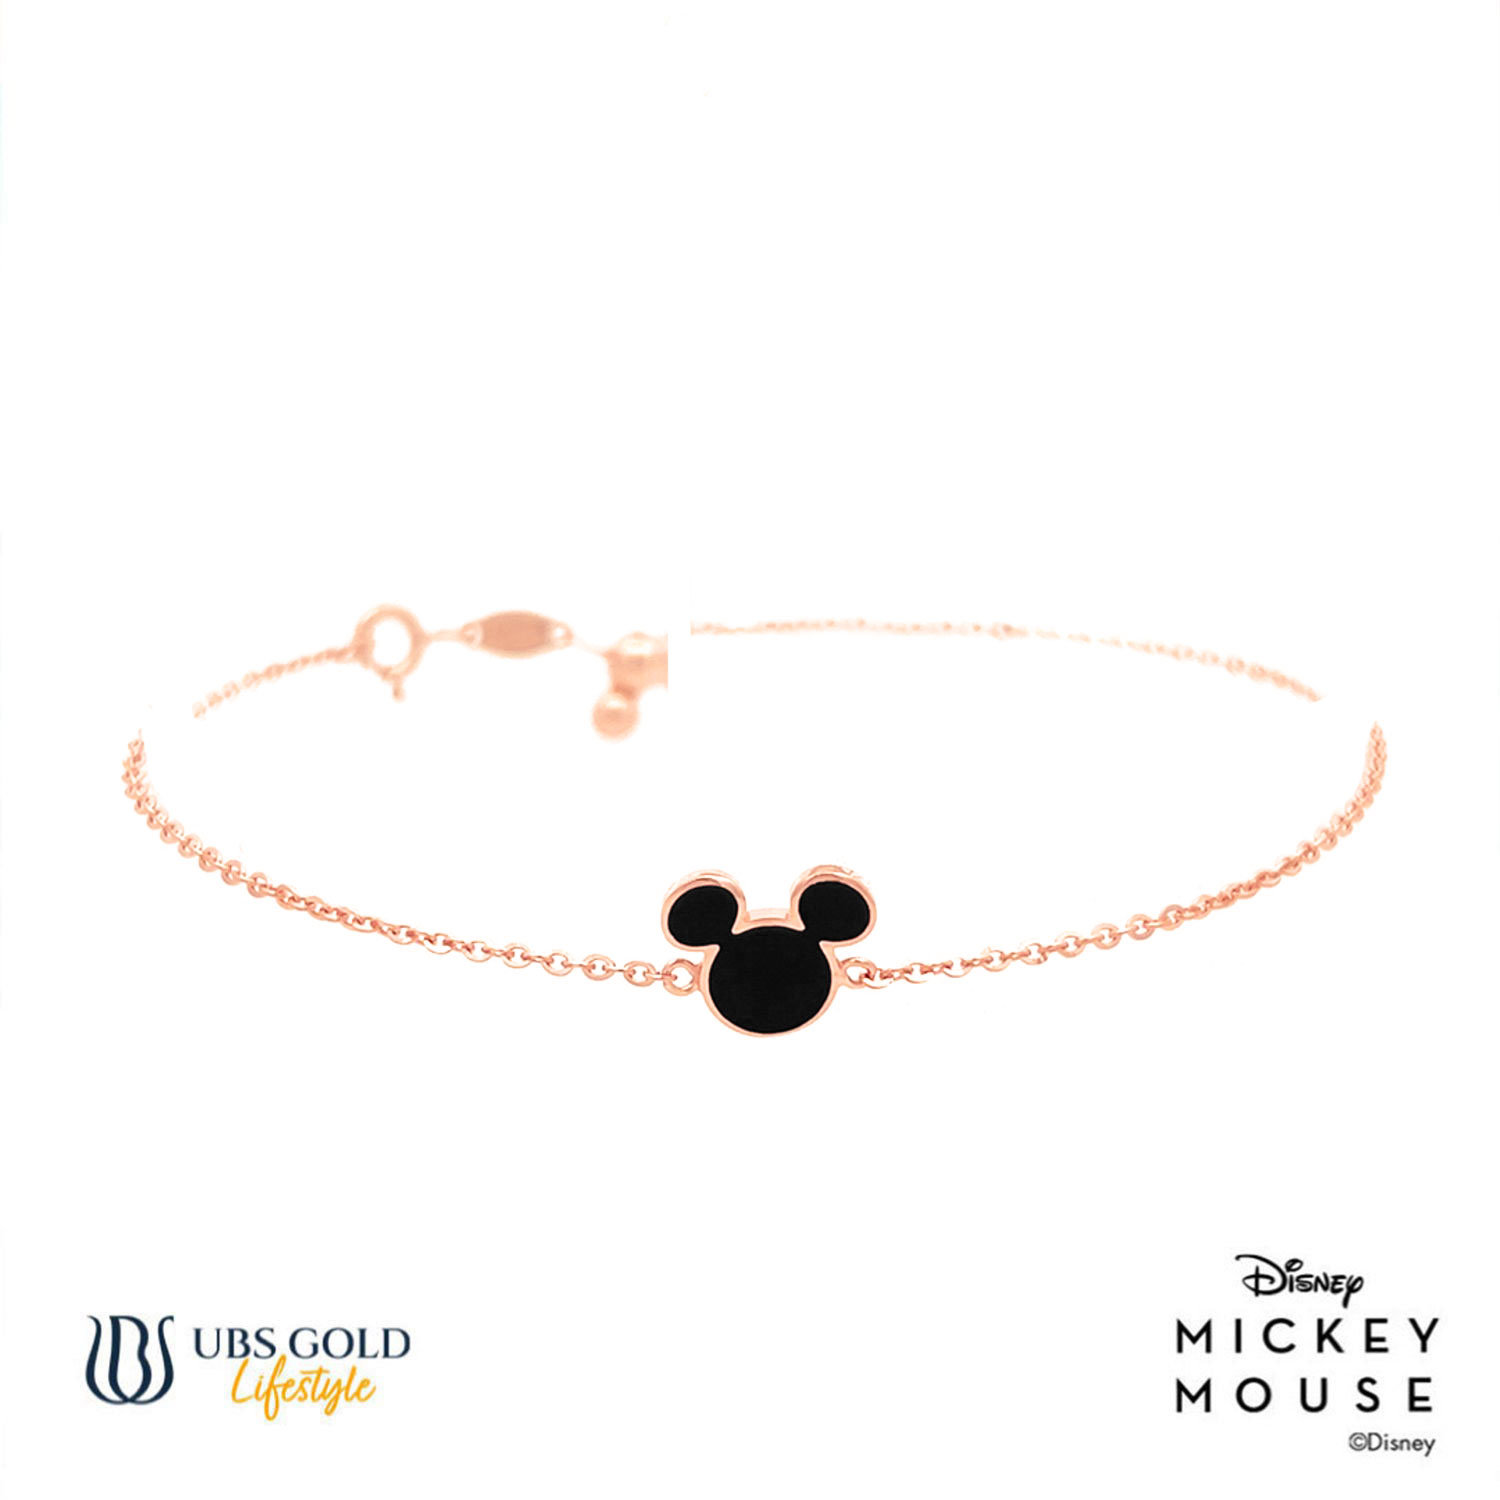 UBS Gold Gelang Emas Disney Mickey Mouse - Kgy0113 - 17K